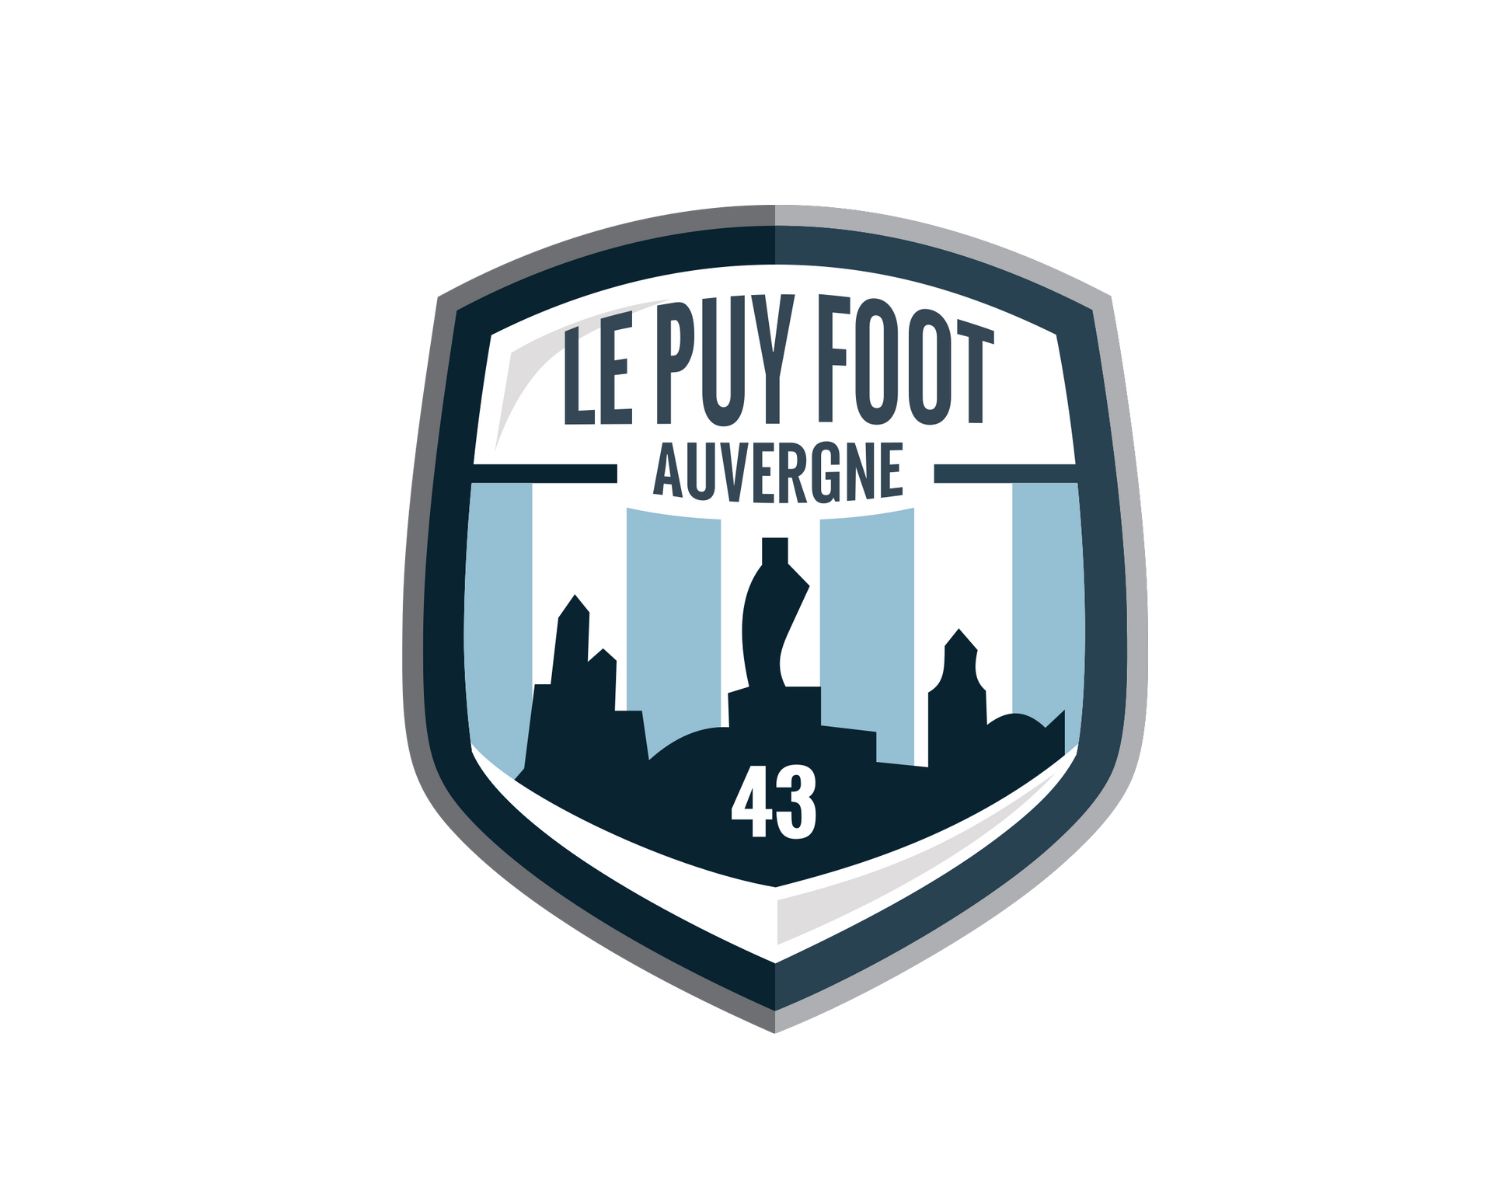 le-puy-foot-43-21-football-club-facts